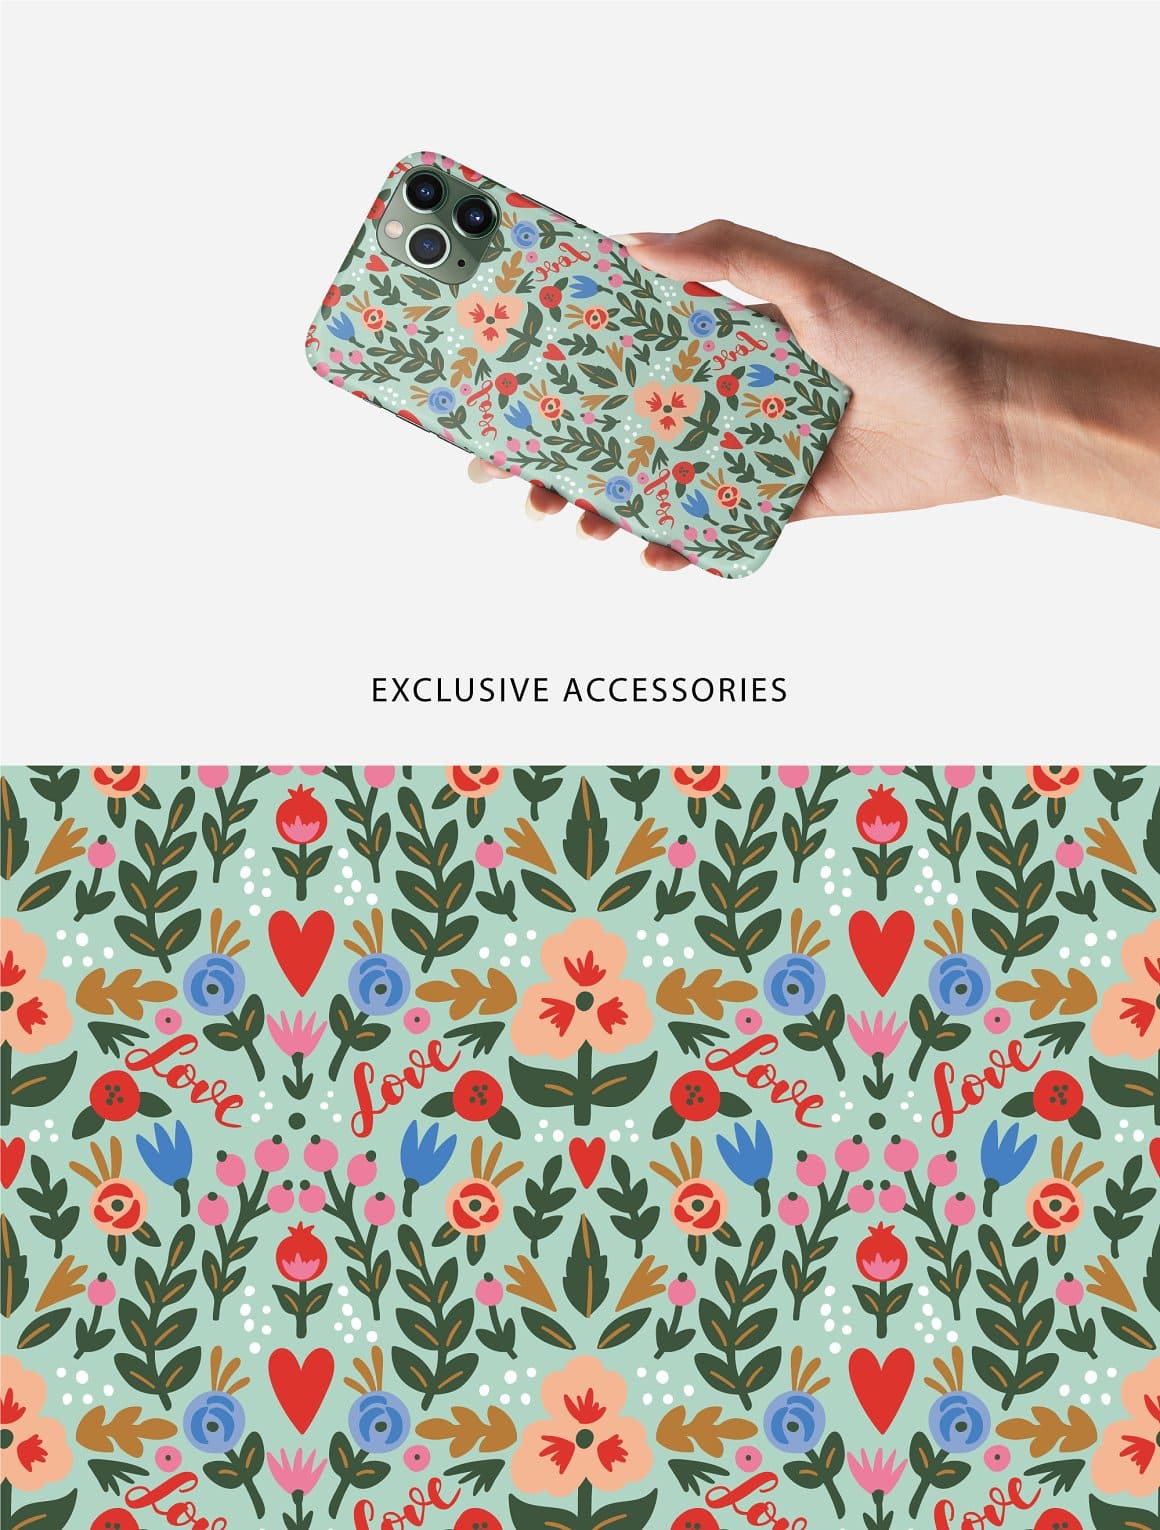 Phone case with "Mon amour pattern" design.